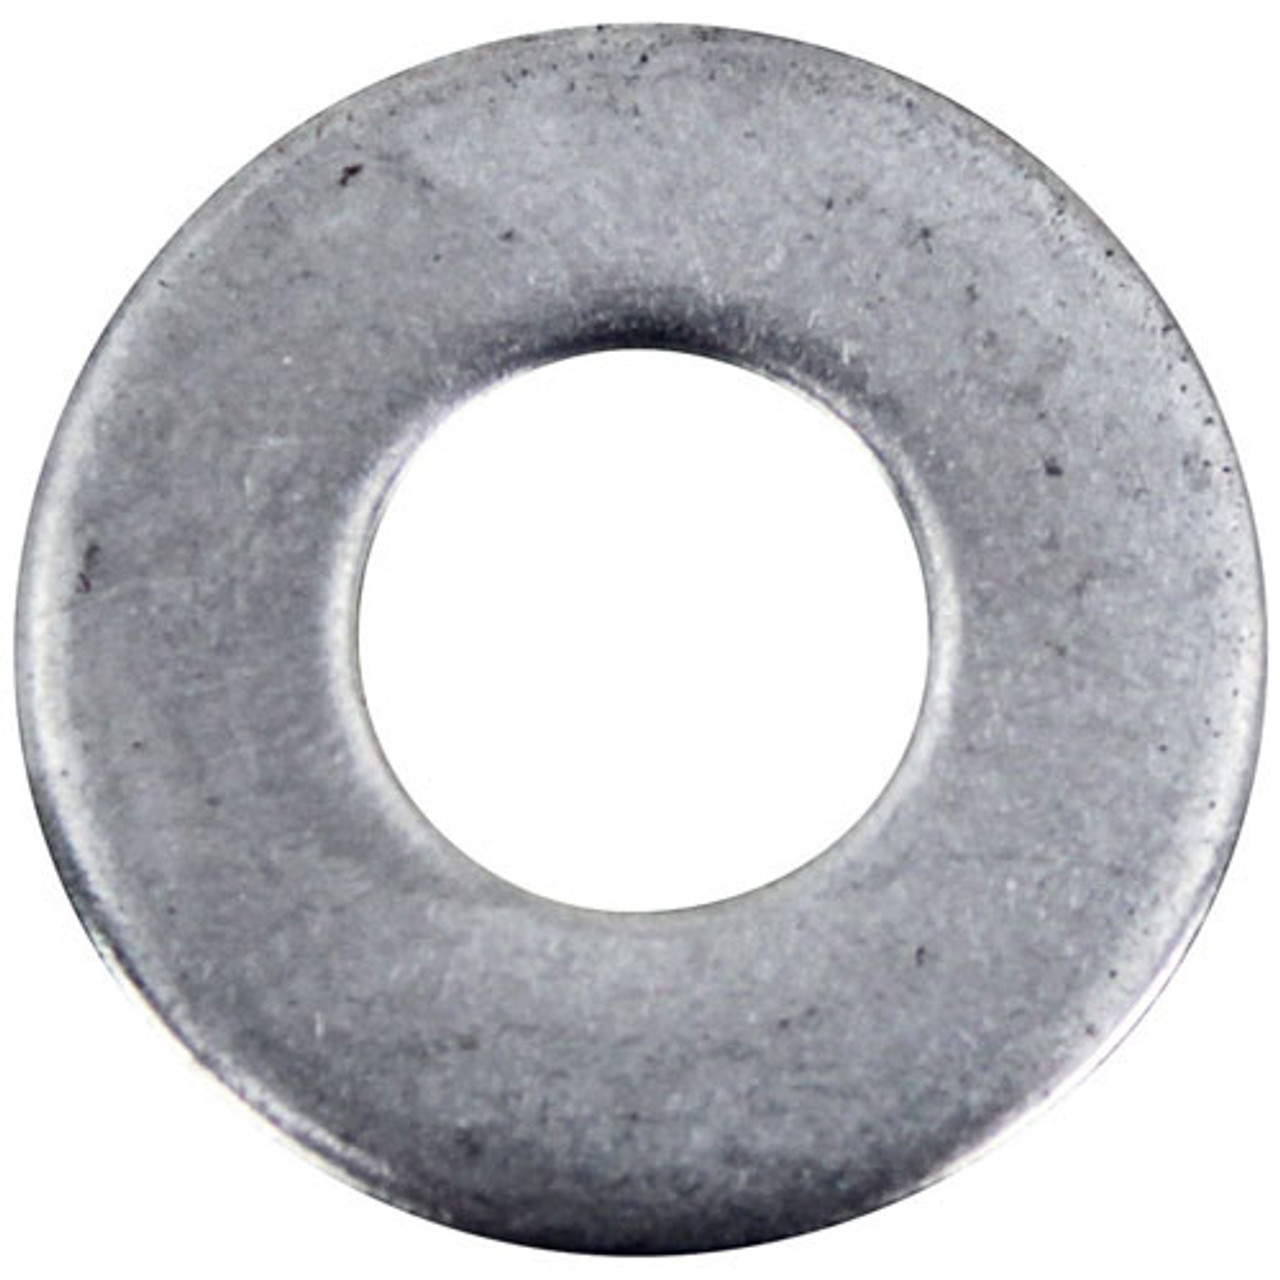 Lincoln 369953 - Washer - Flat,S/S